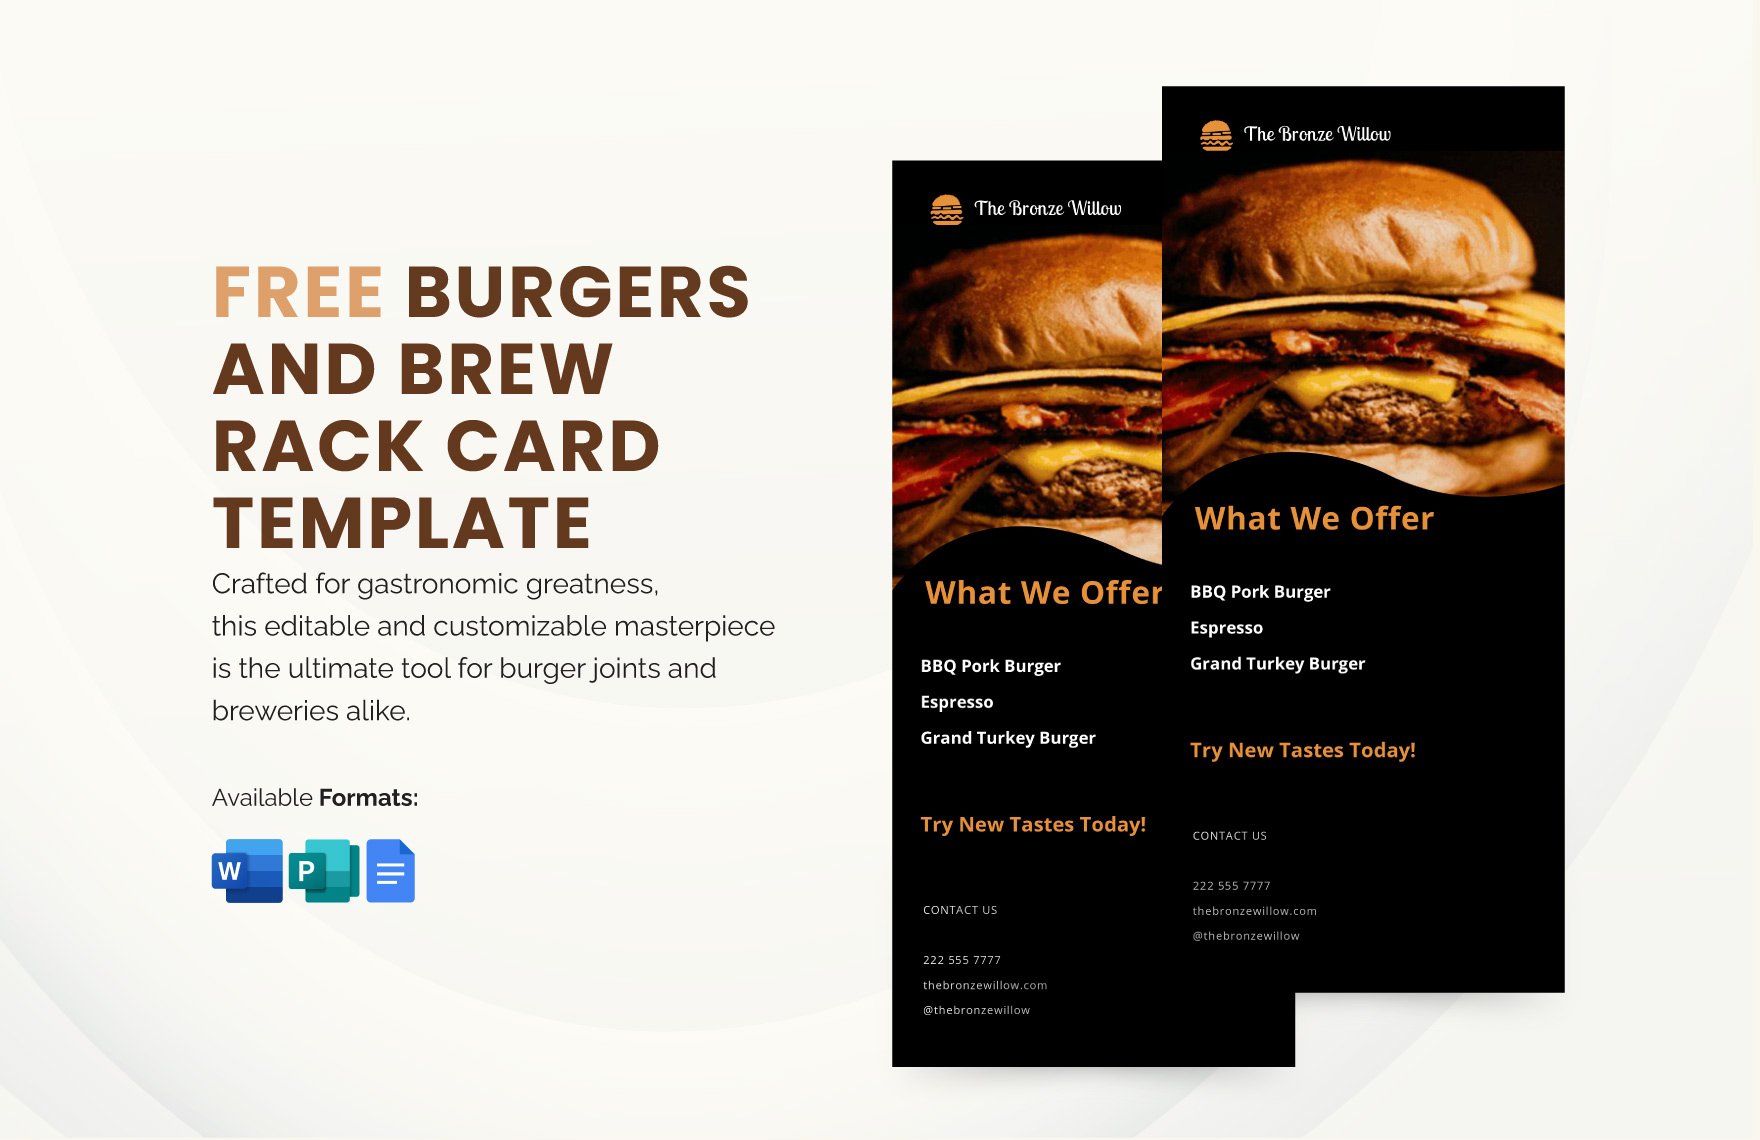 Free Burgers and Brews Rack Card Template